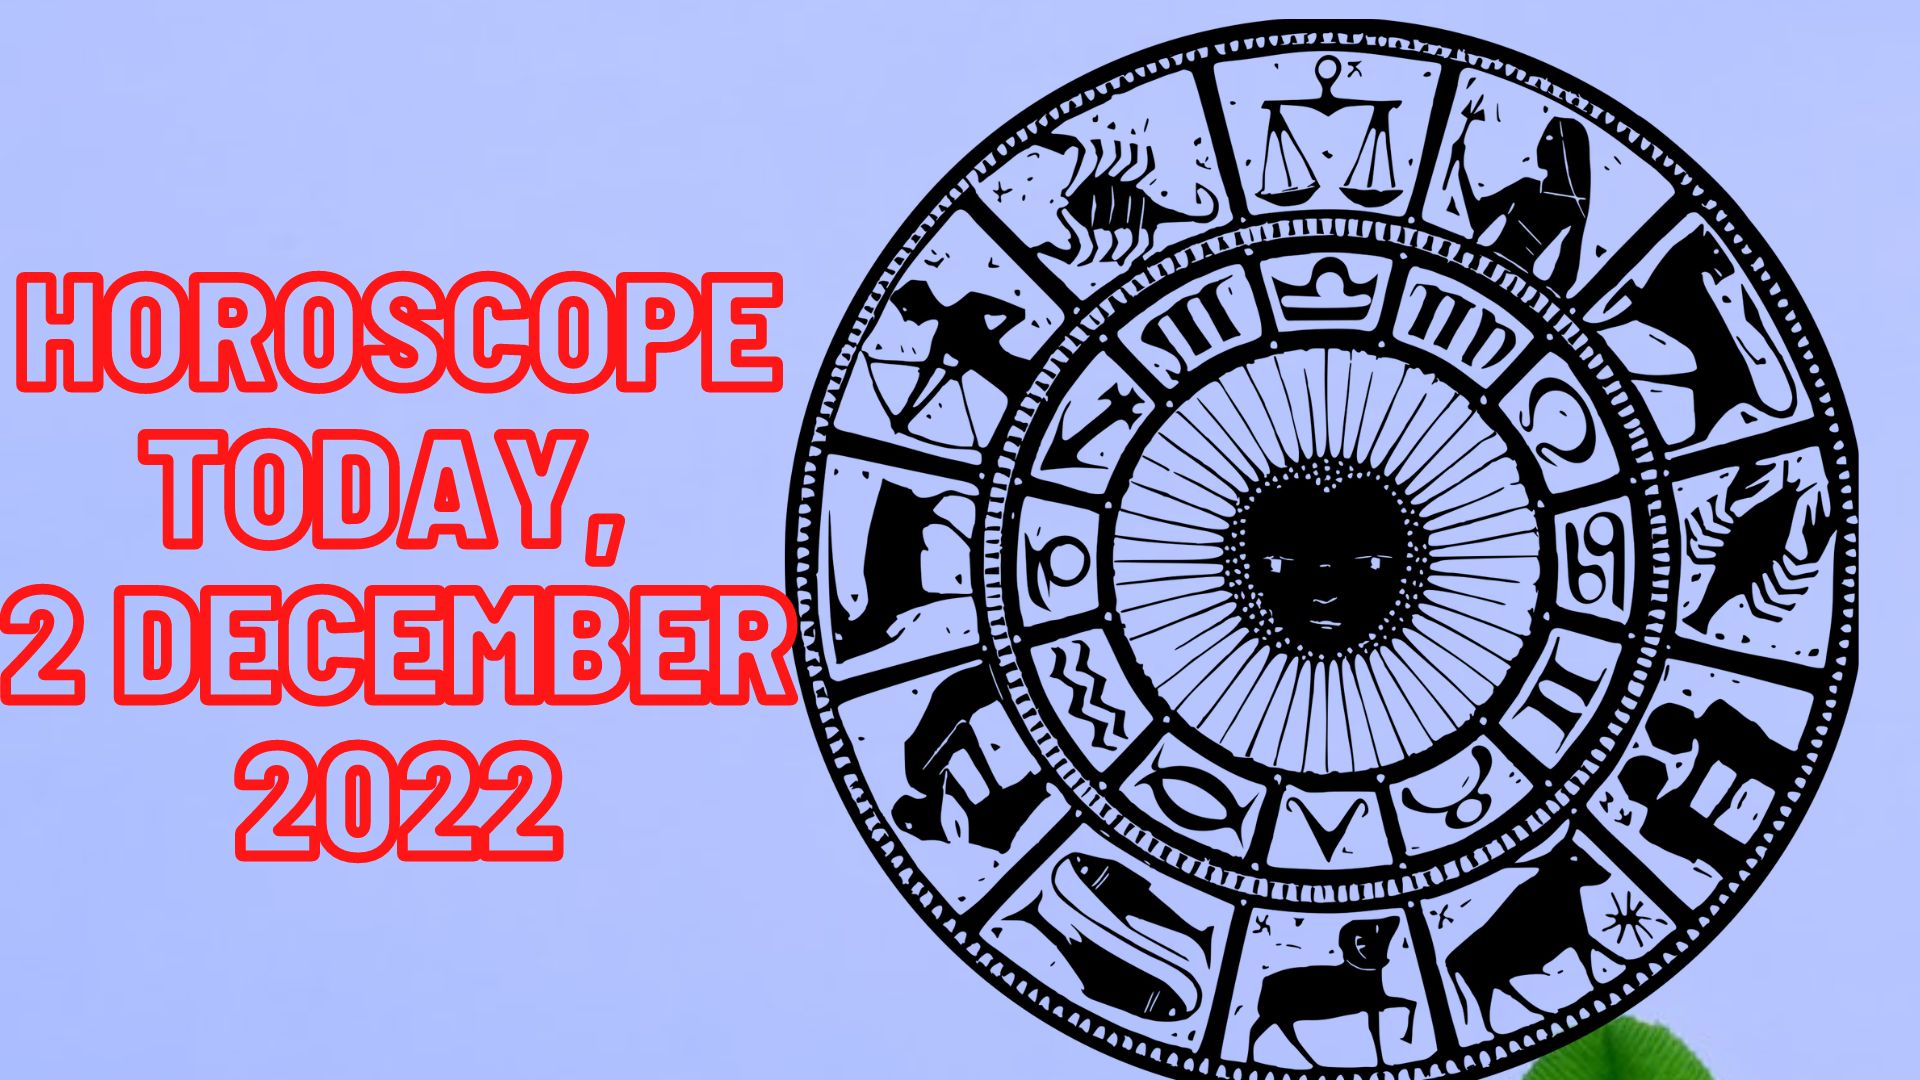 Horoscope Today, 2 December 2022 - Check Astrological Predictions